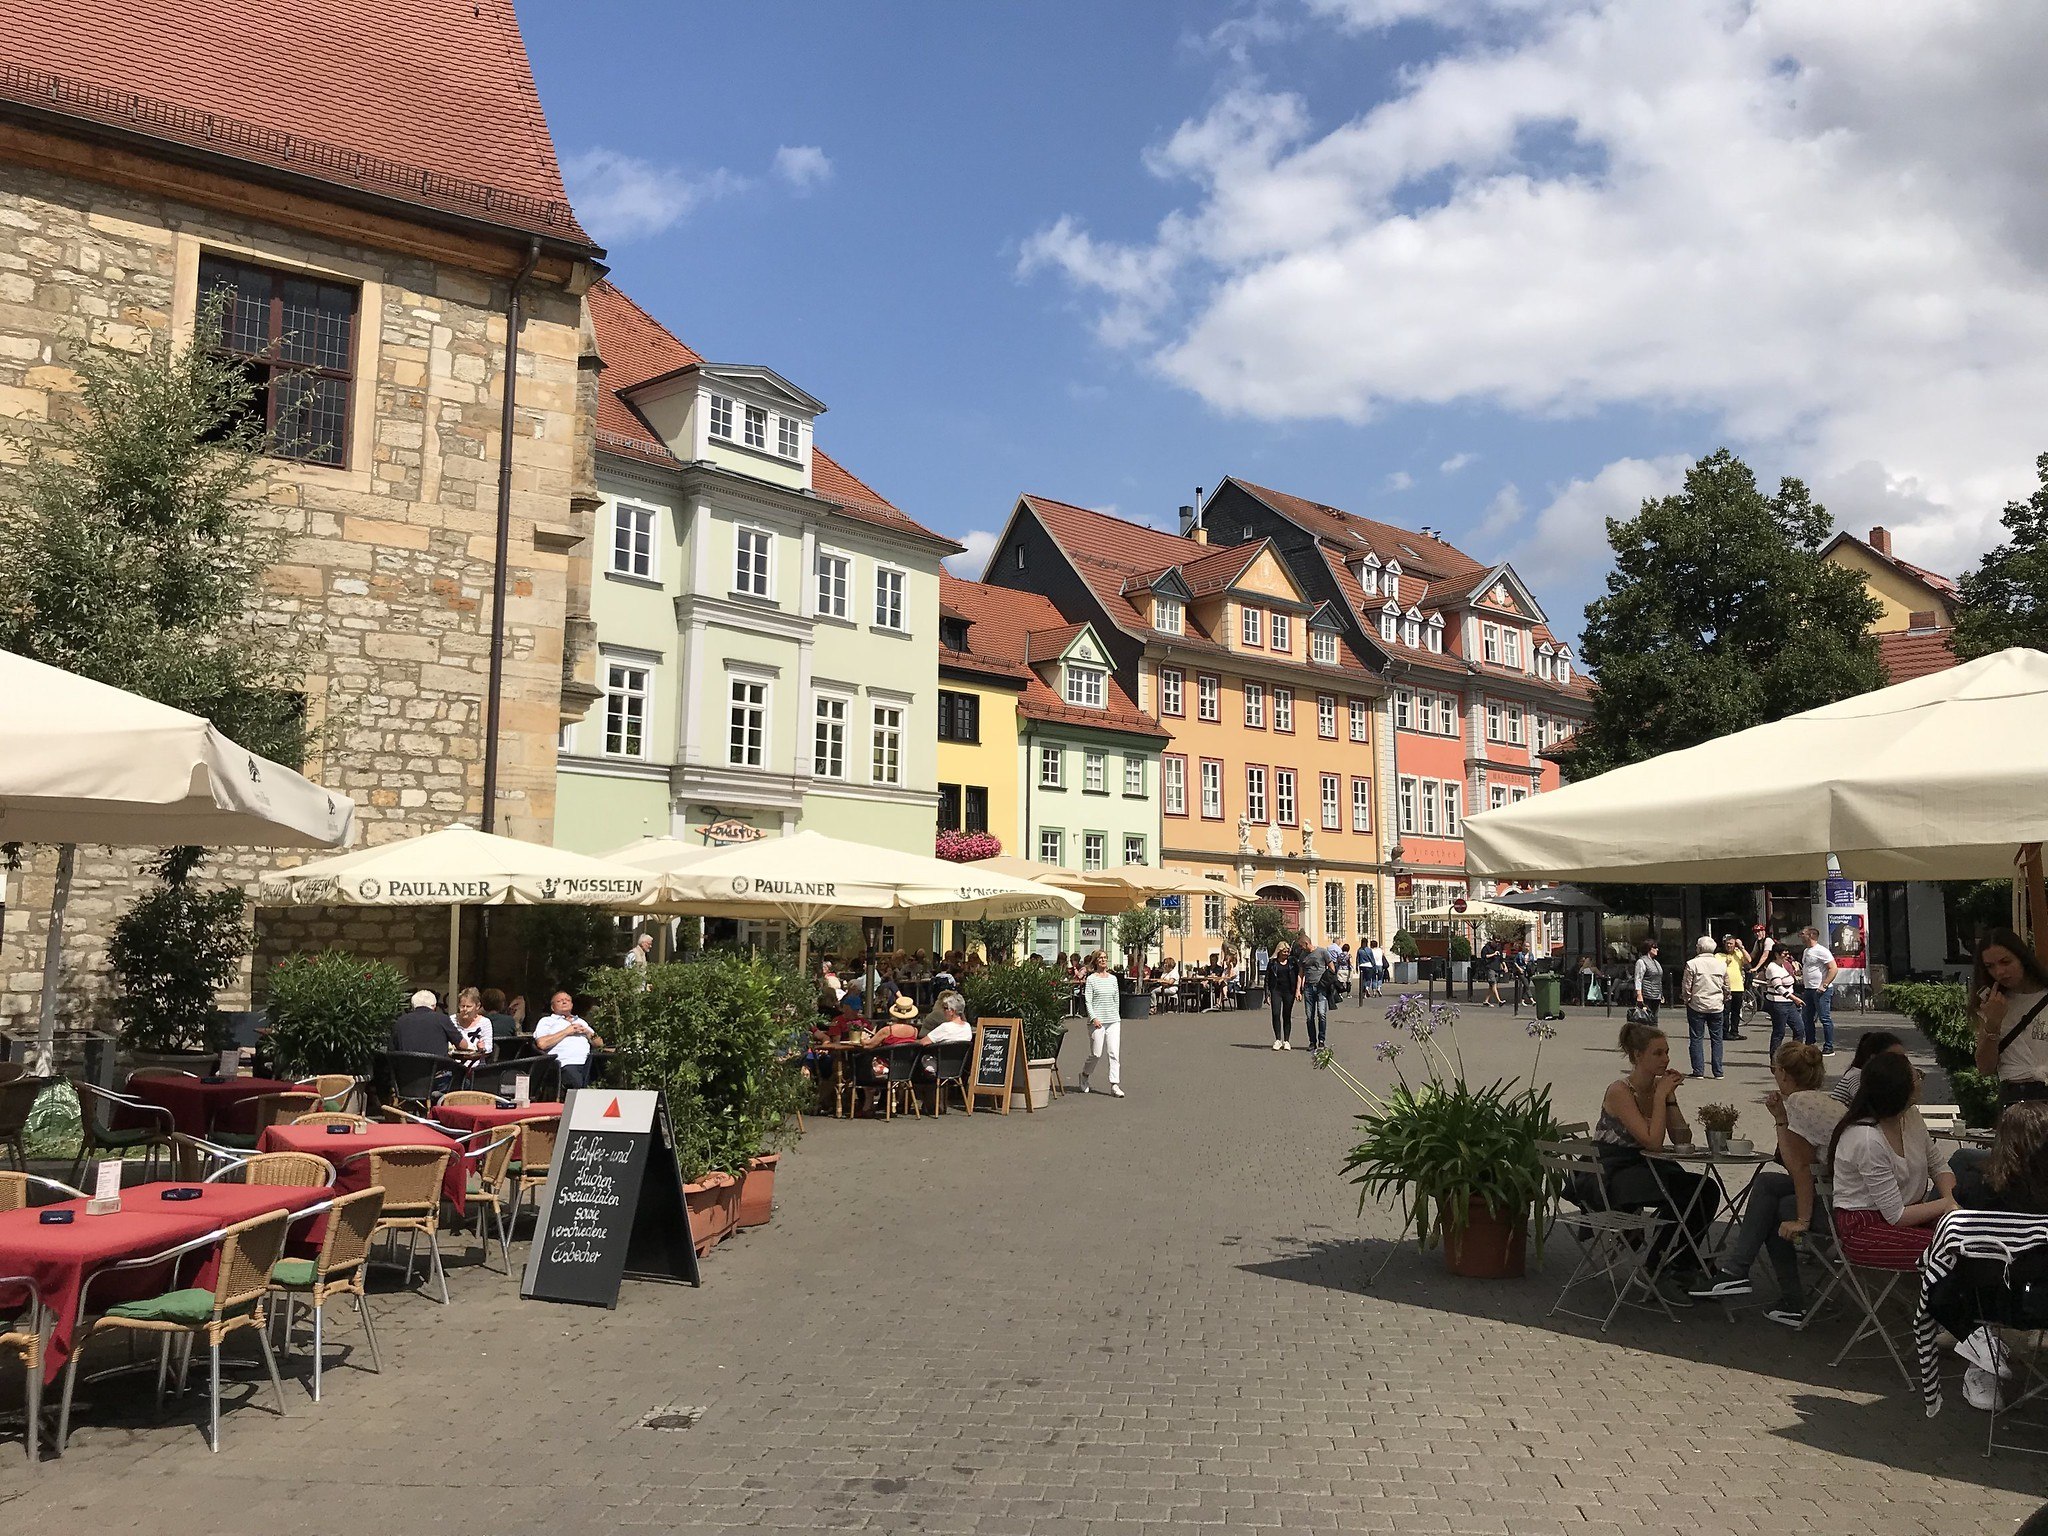 Things to do in Erfurt, Thuringia, Germany